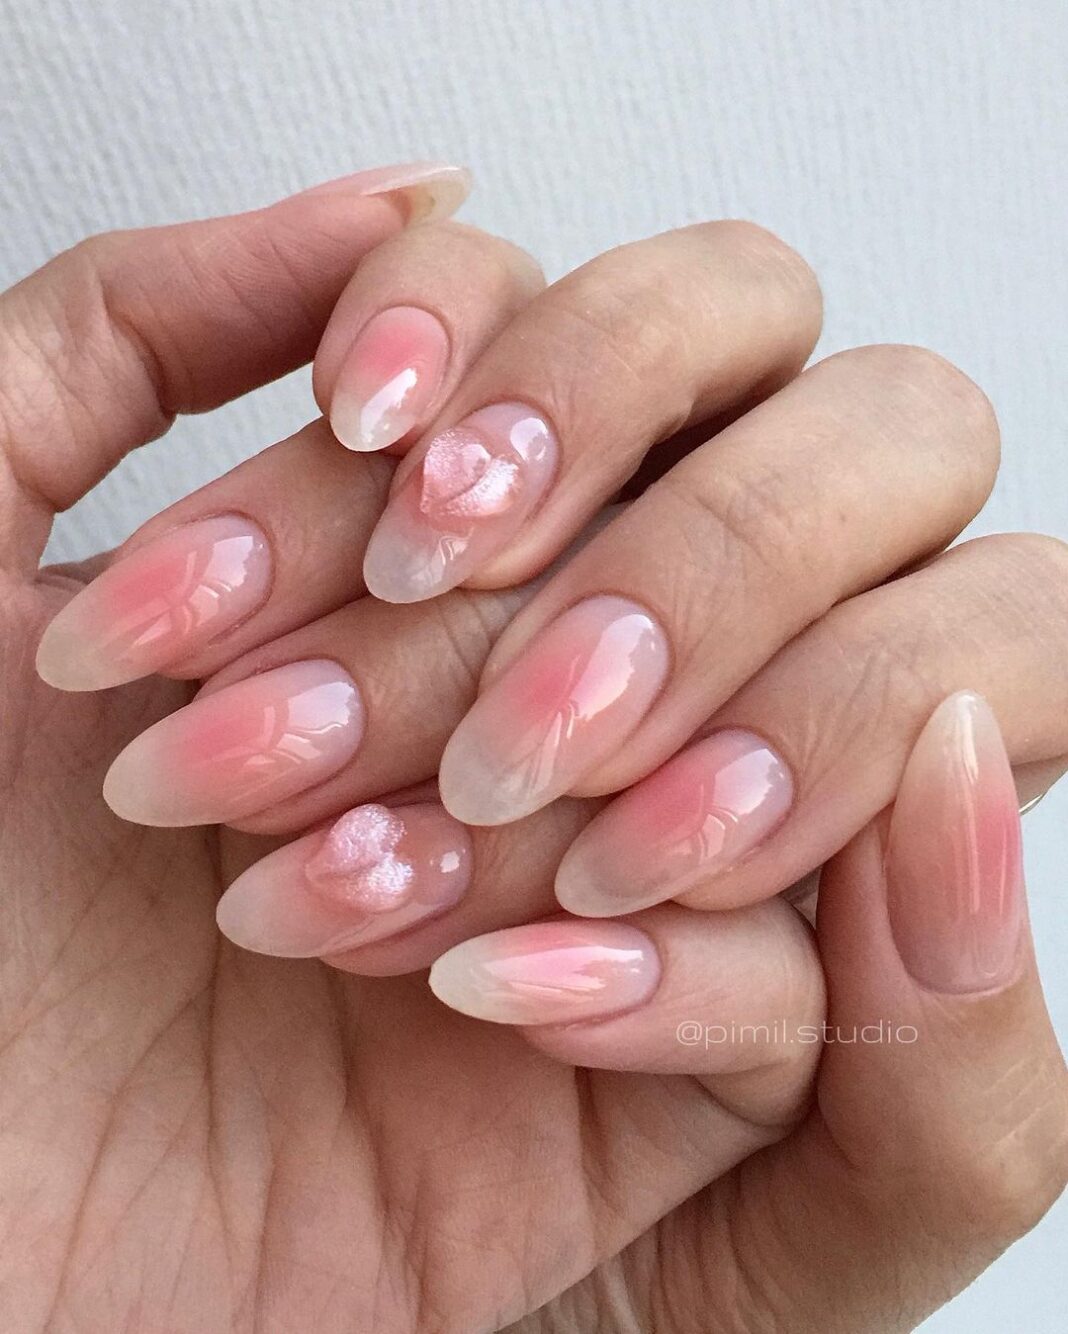 Blush Nails Trend This Manicure From Korea Will Make Your Nails Blush The Fashion Vibes